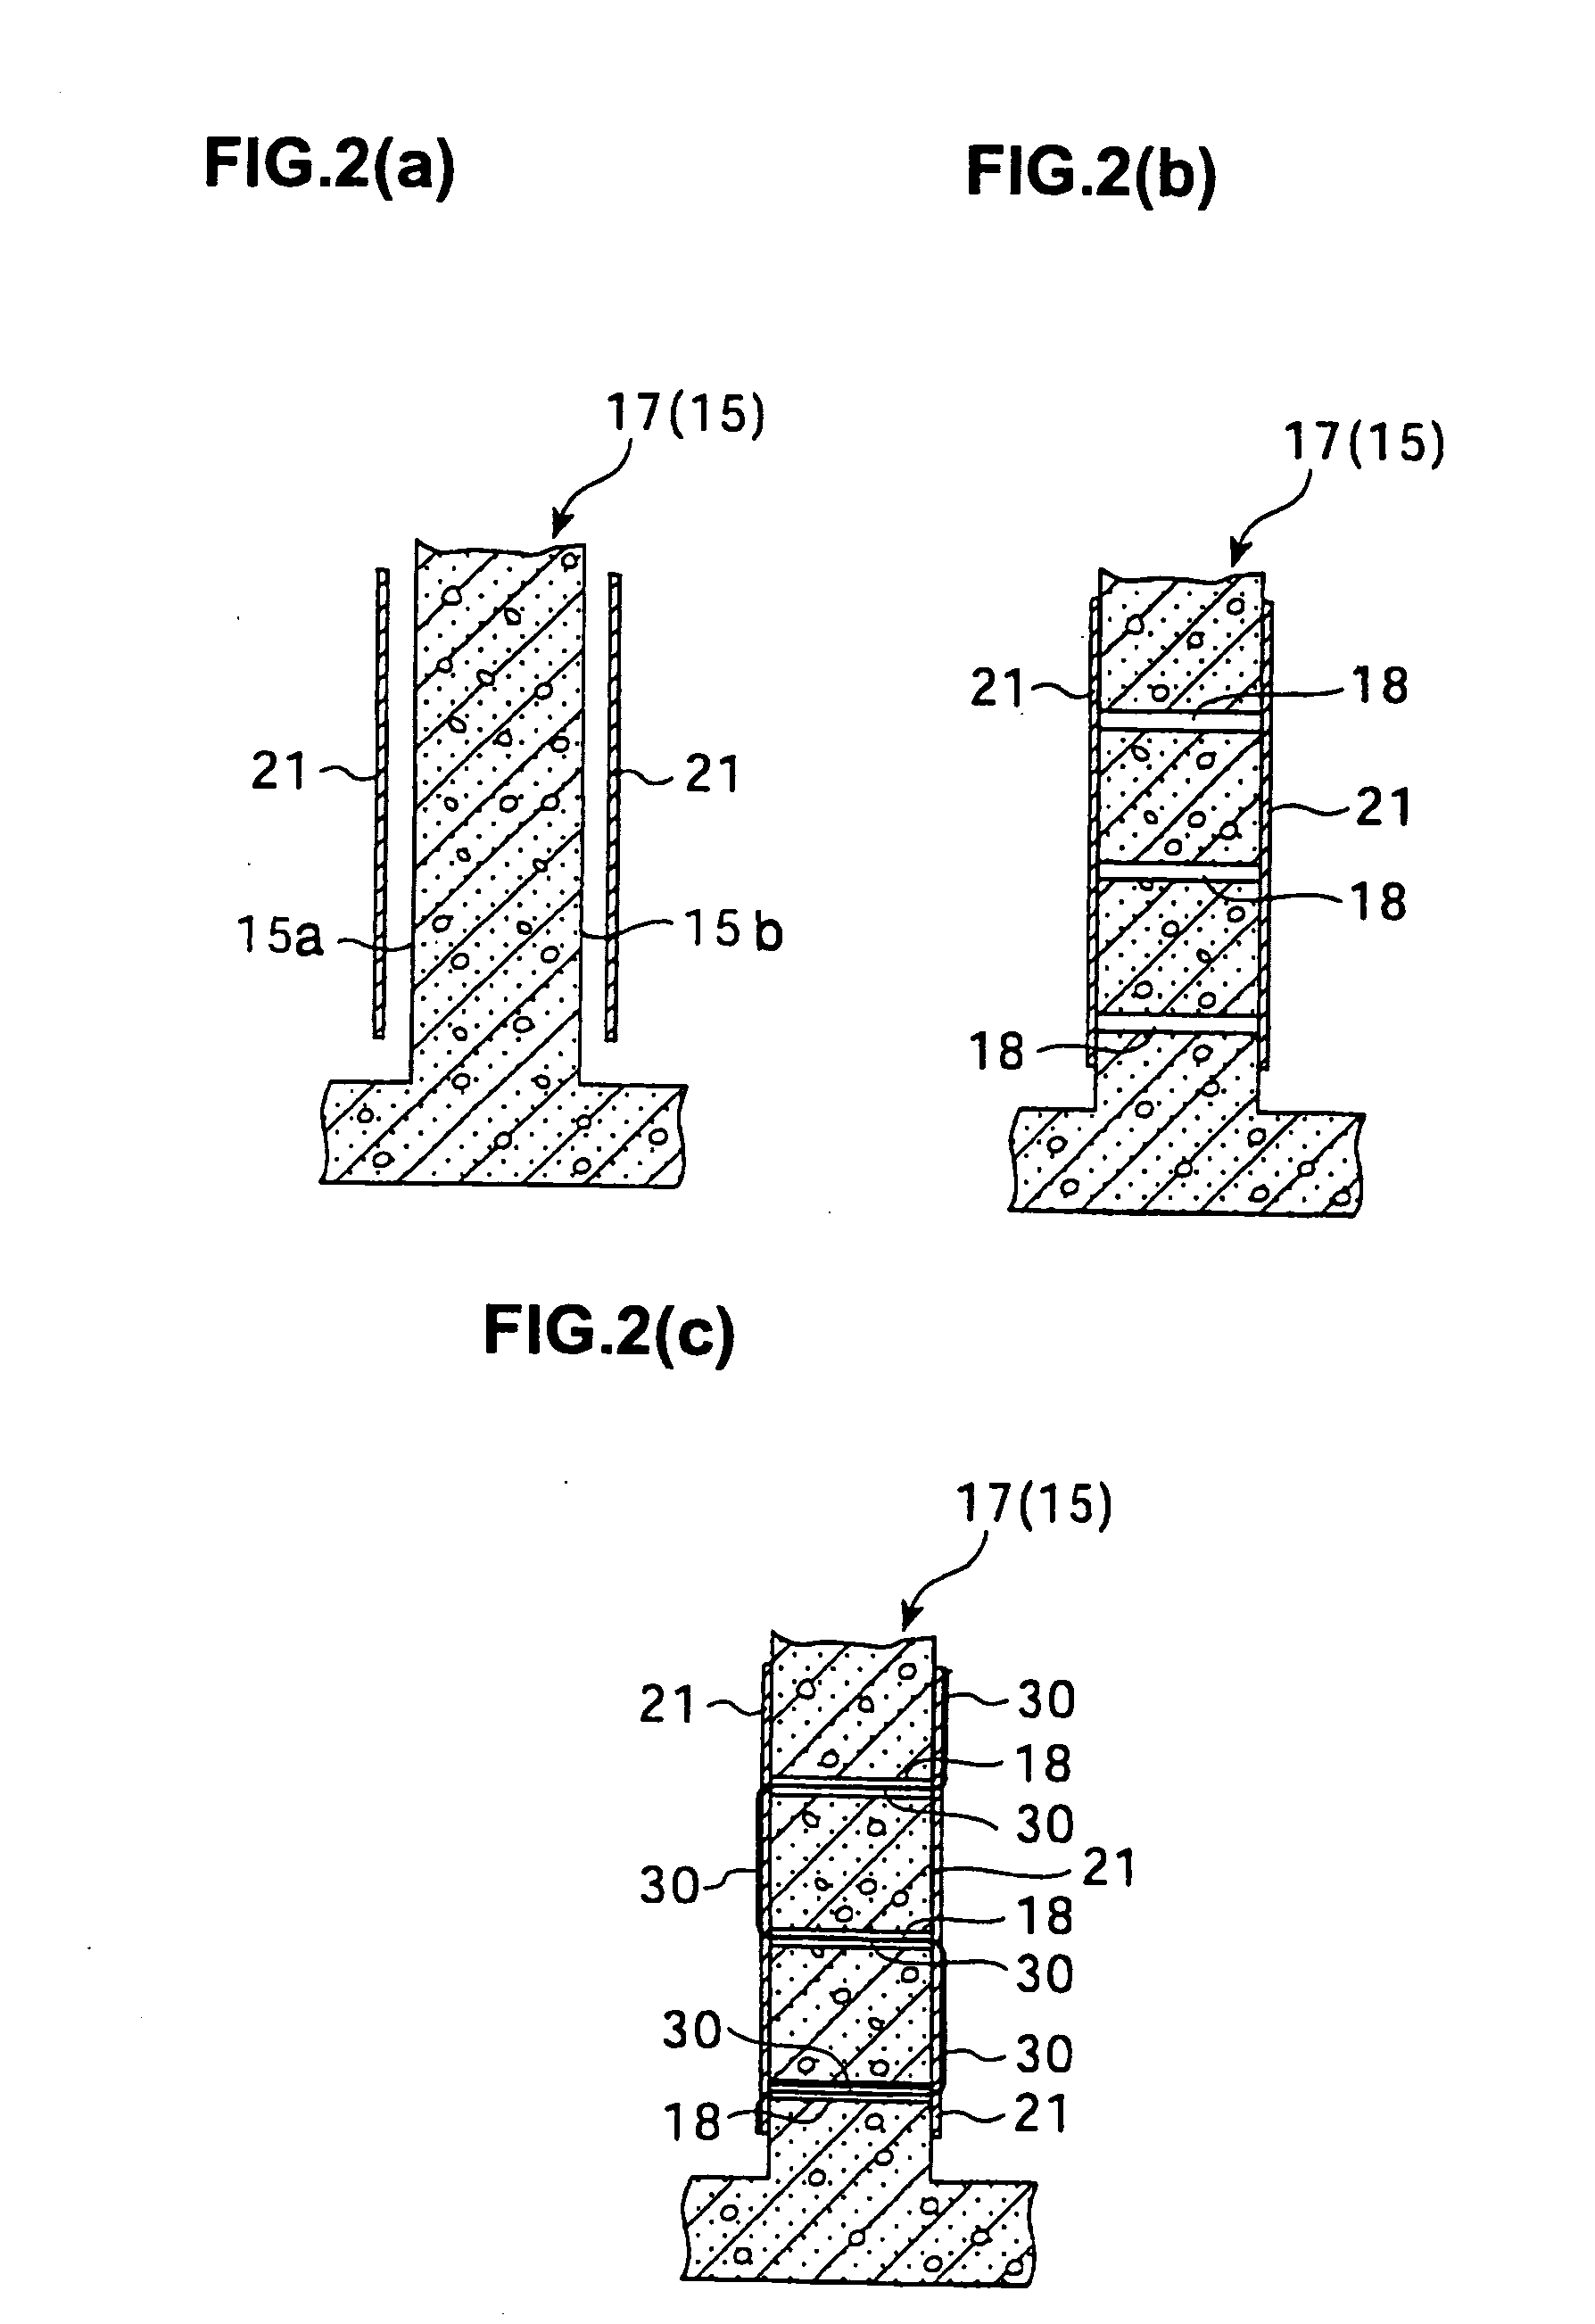 Building reinforcing method, material and structure